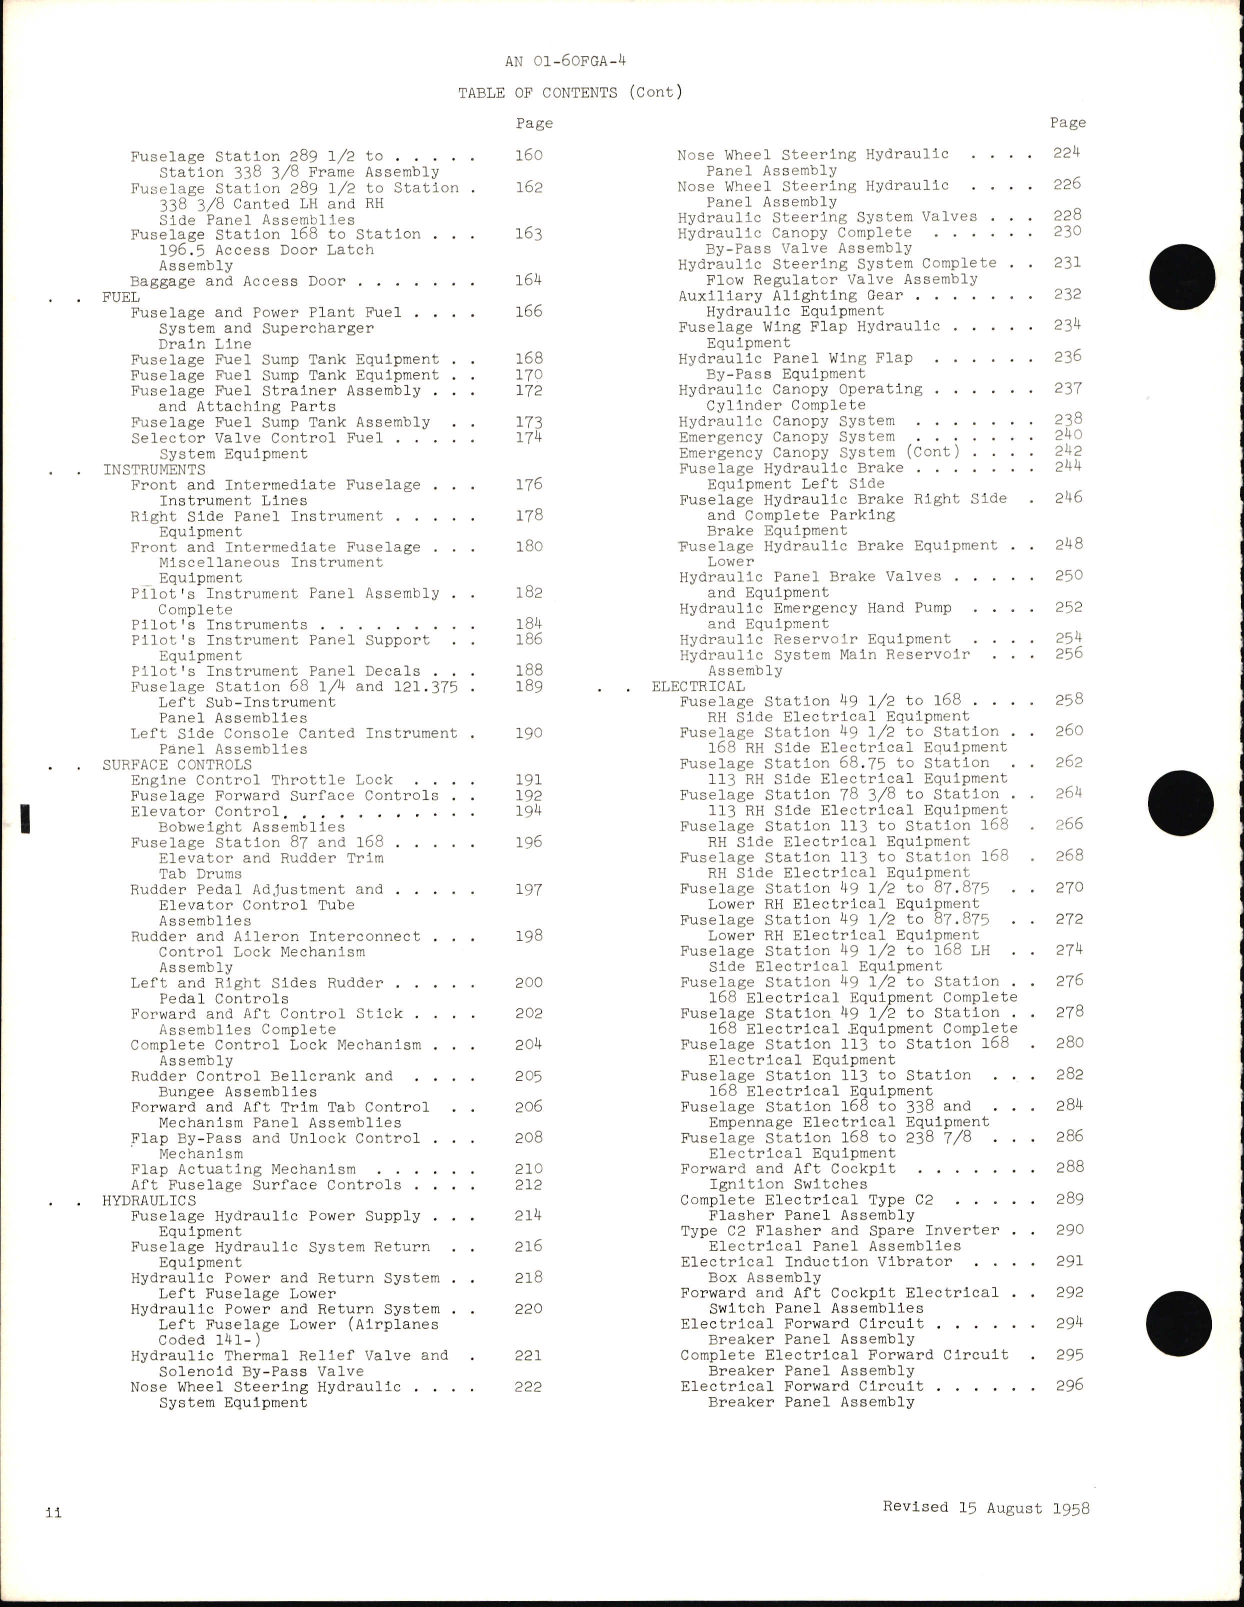 Sample page 6 from AirCorps Library document: Illustrated Parts Breakdown for T-28A and T-28D